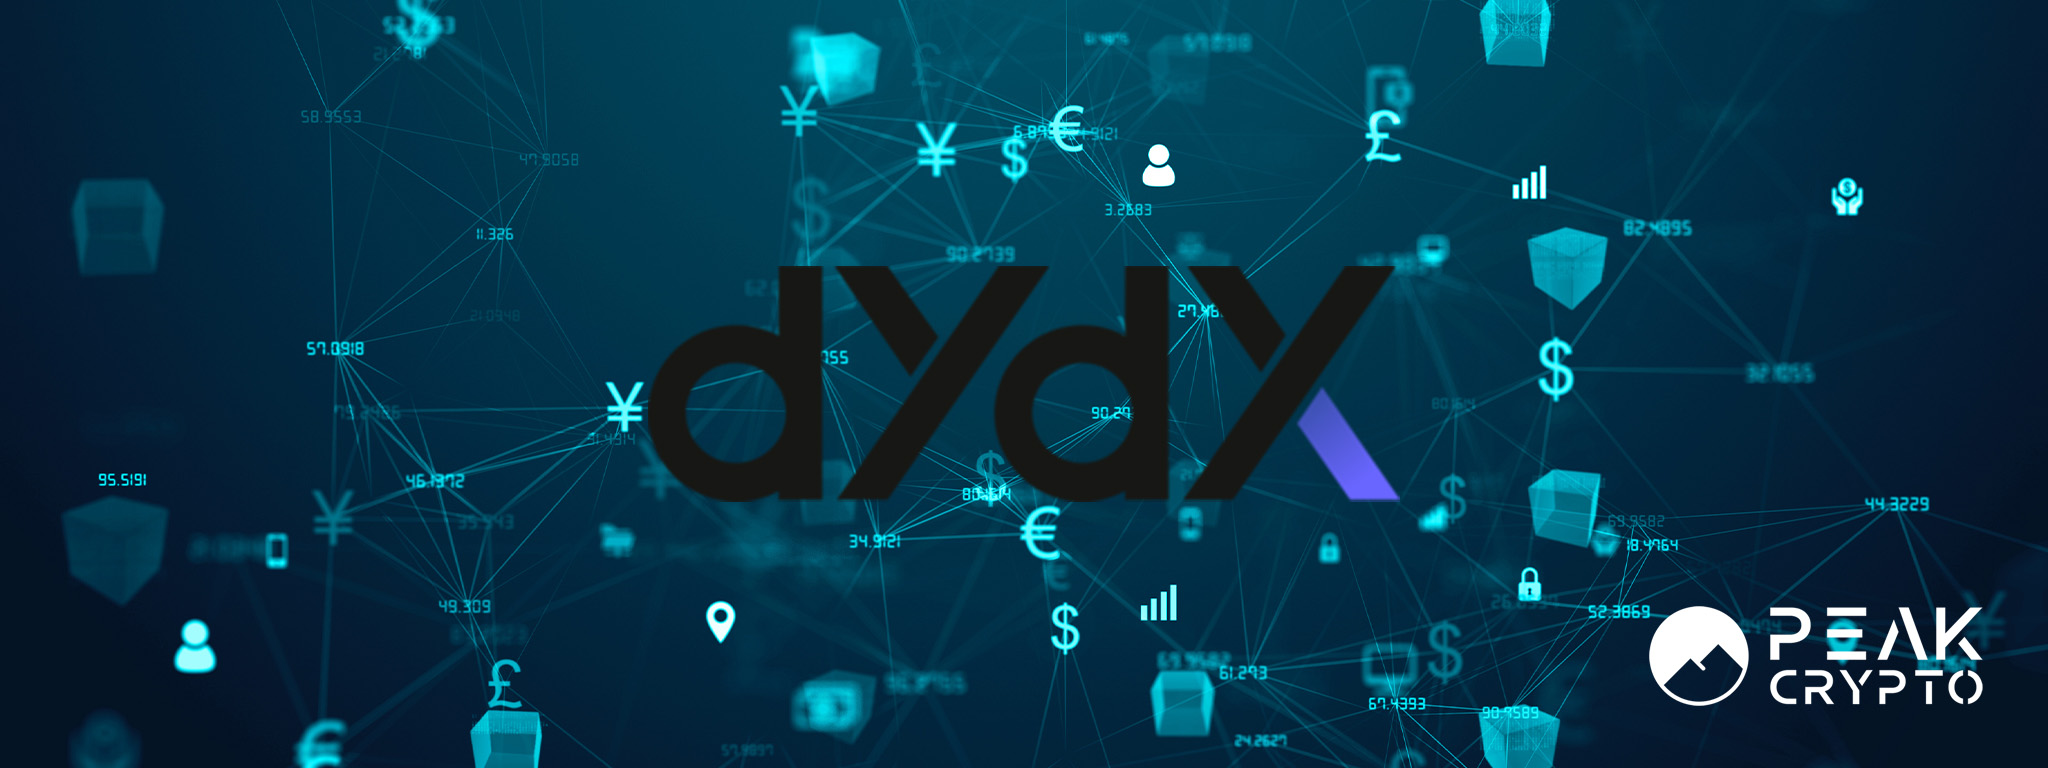 dYdX Debuts Its Layer-1 Blockchain; Complete Fee Allocation to Validators and Stakers